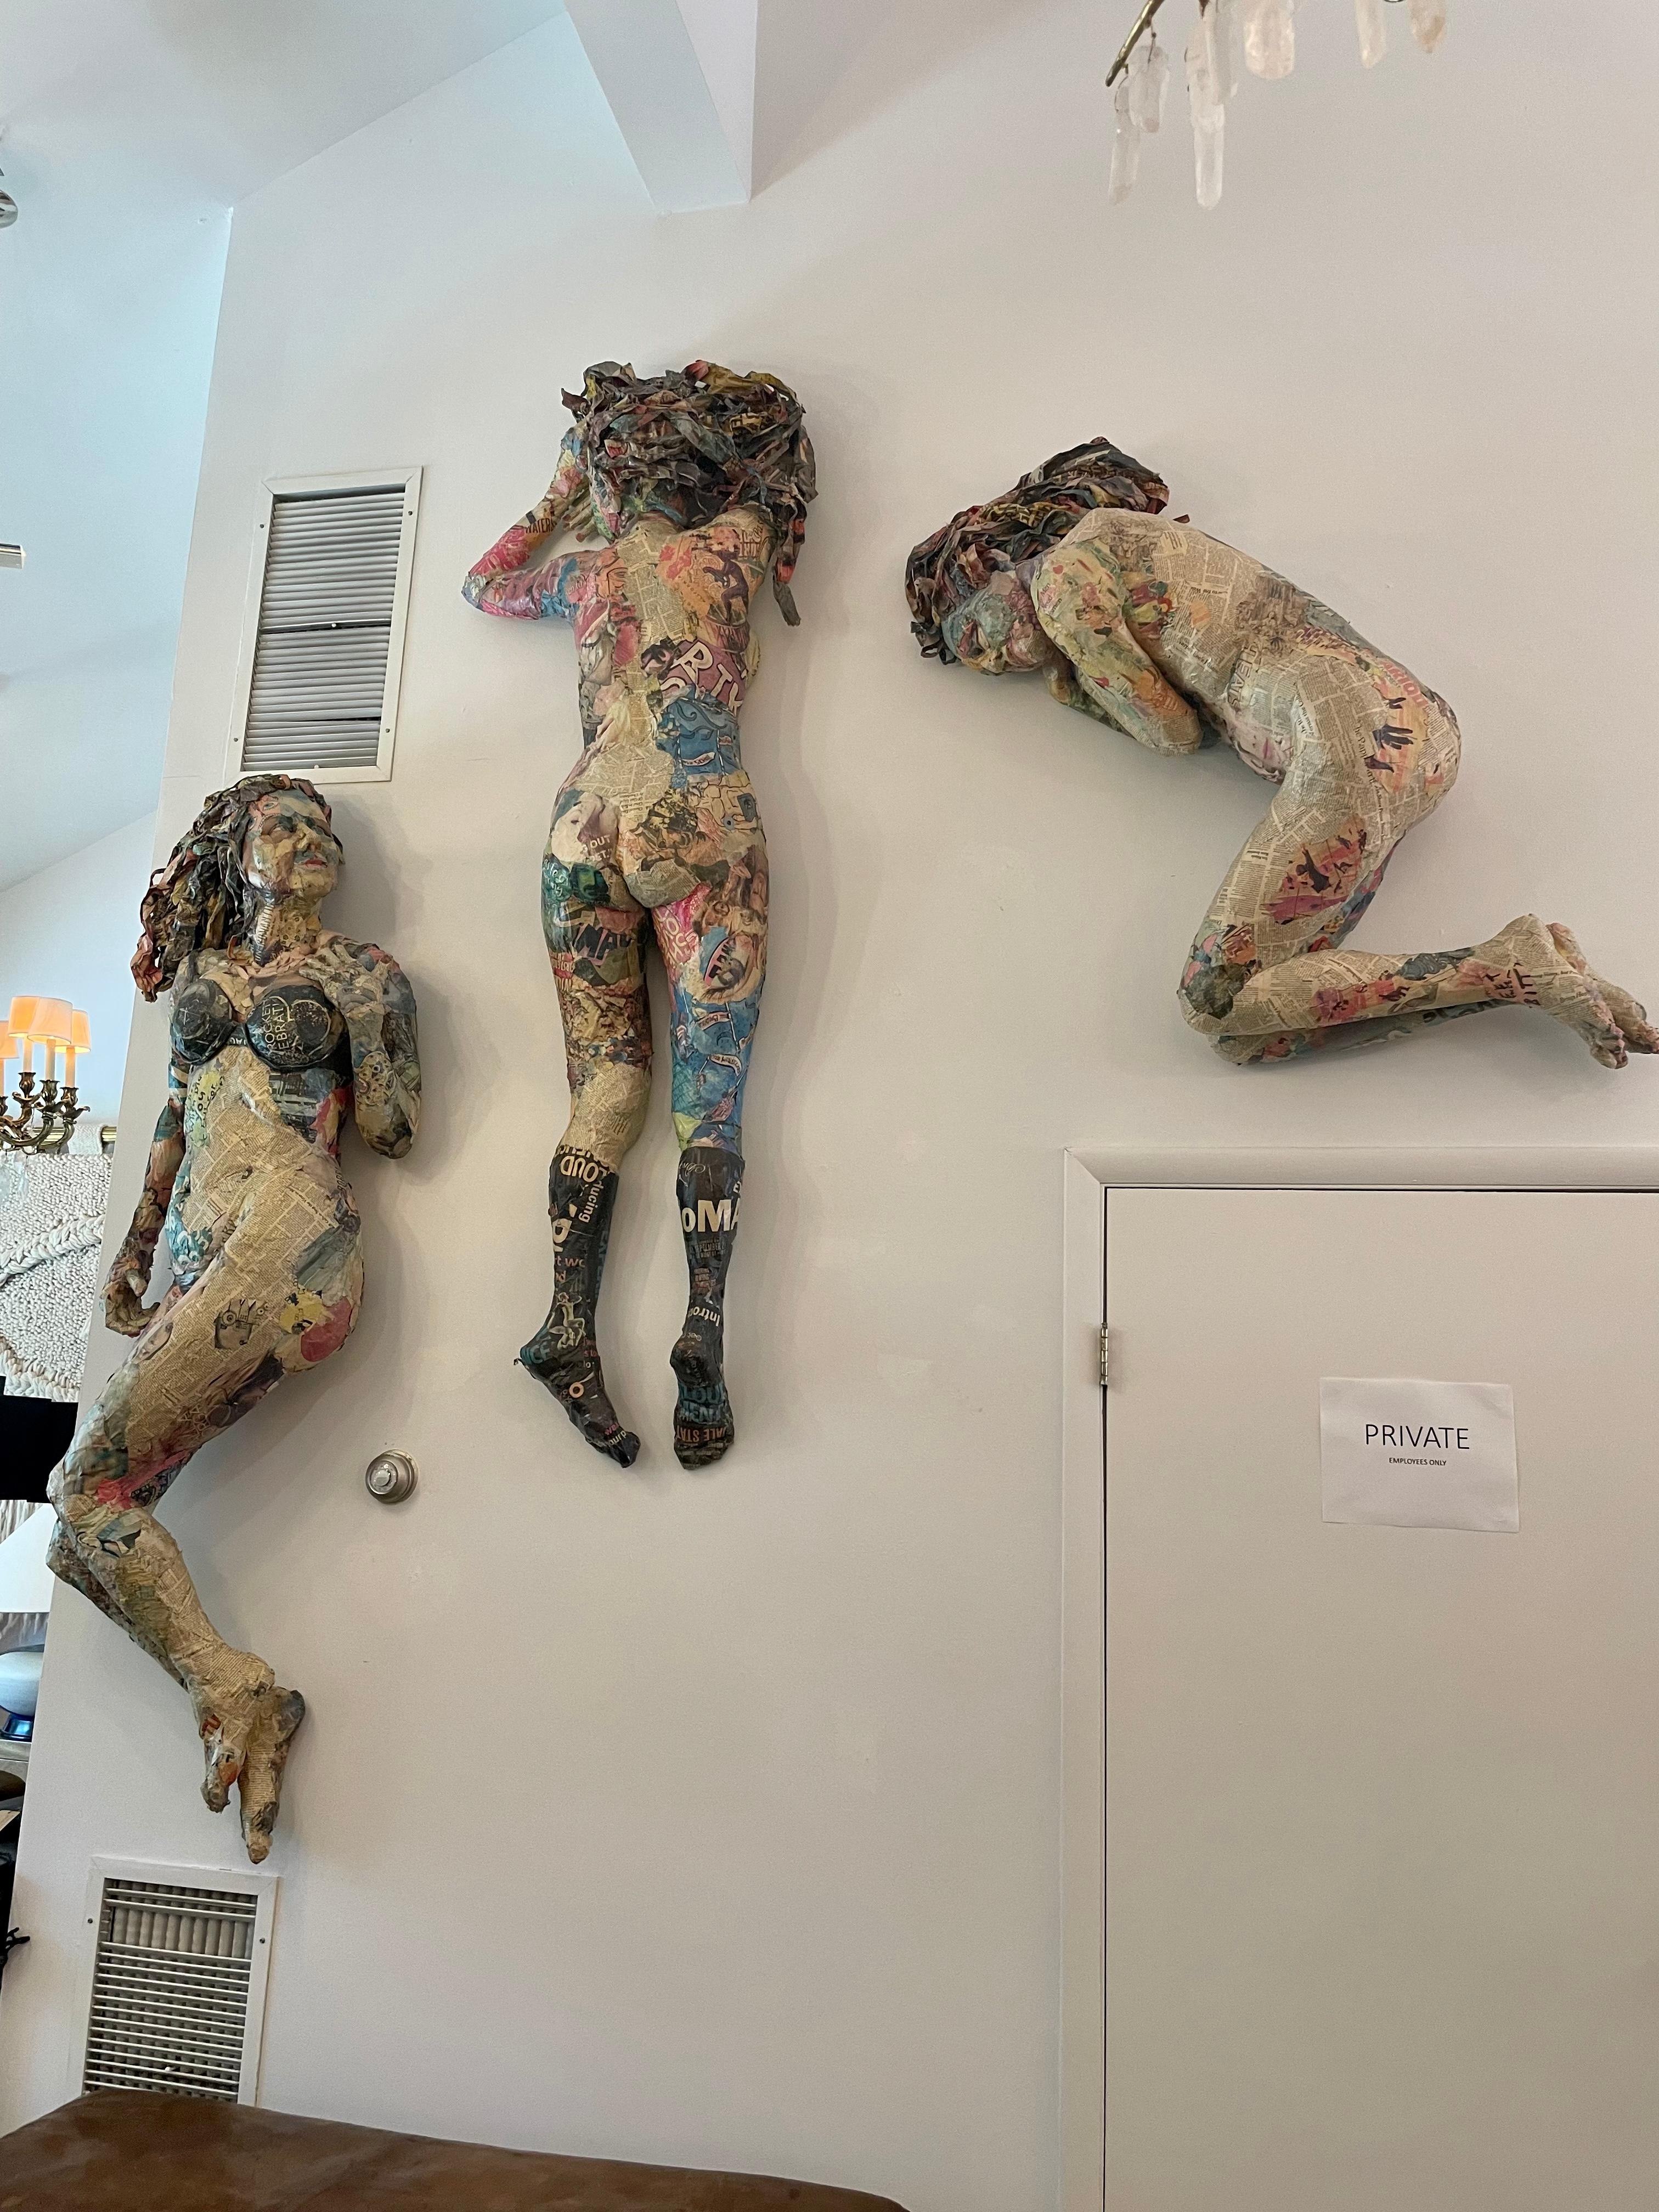 This renowned artist is highly exhibited and collected by major museums around the world. This amazingly well executed life sized models of women in repose are wall mounted. The clippings on each sculpture are very intentional and well placed. SEE